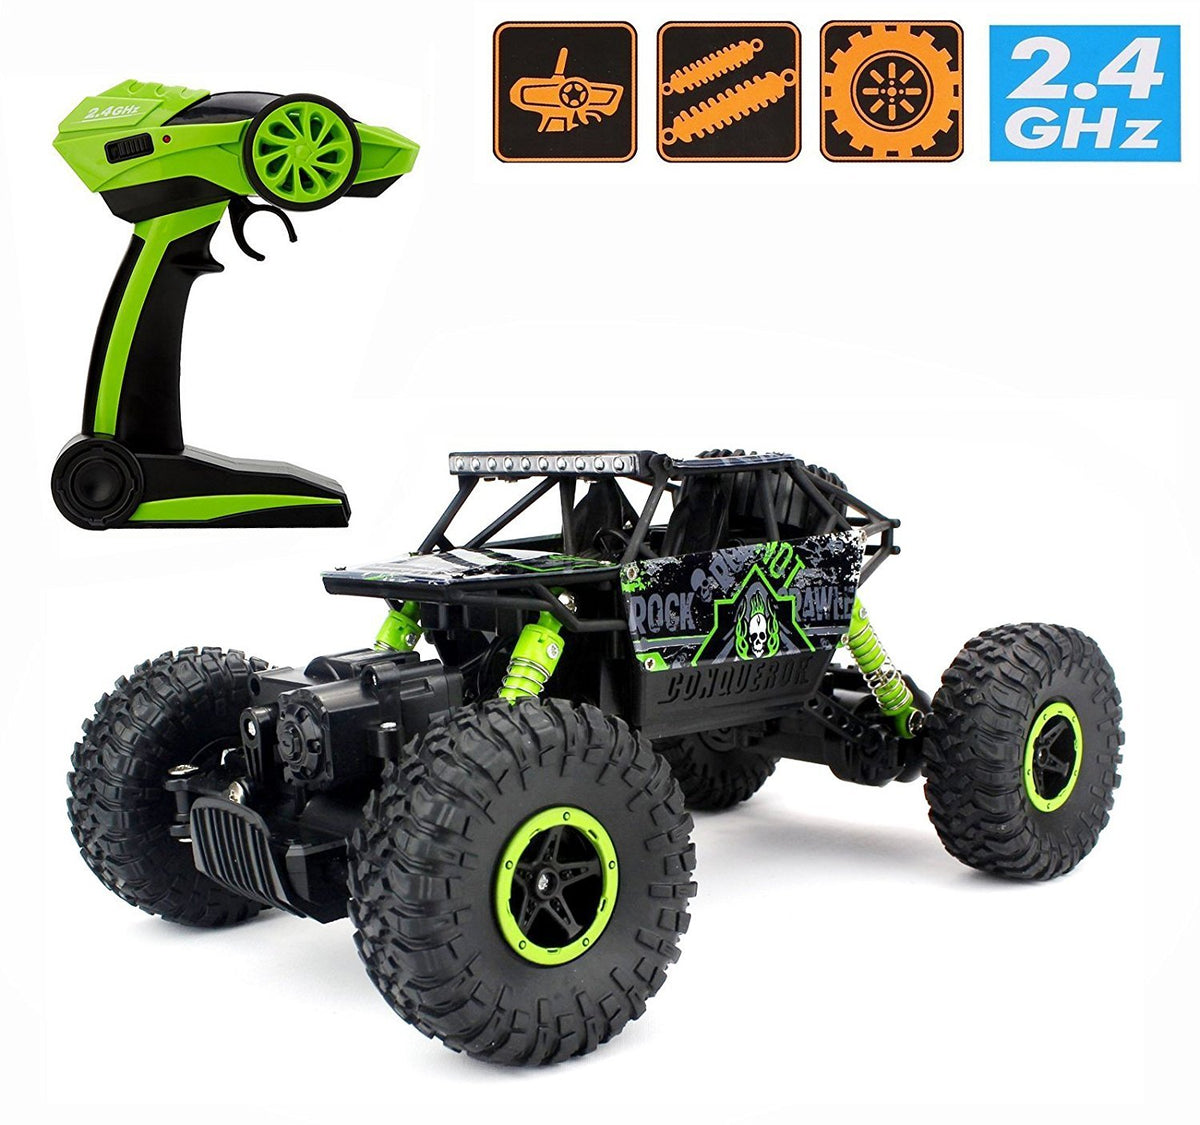 Rock Crawler 1:18 Scale 4WD 2.4 Ghz 4x4 Rally Car RC Monster Truck Kids Play Toys, Green